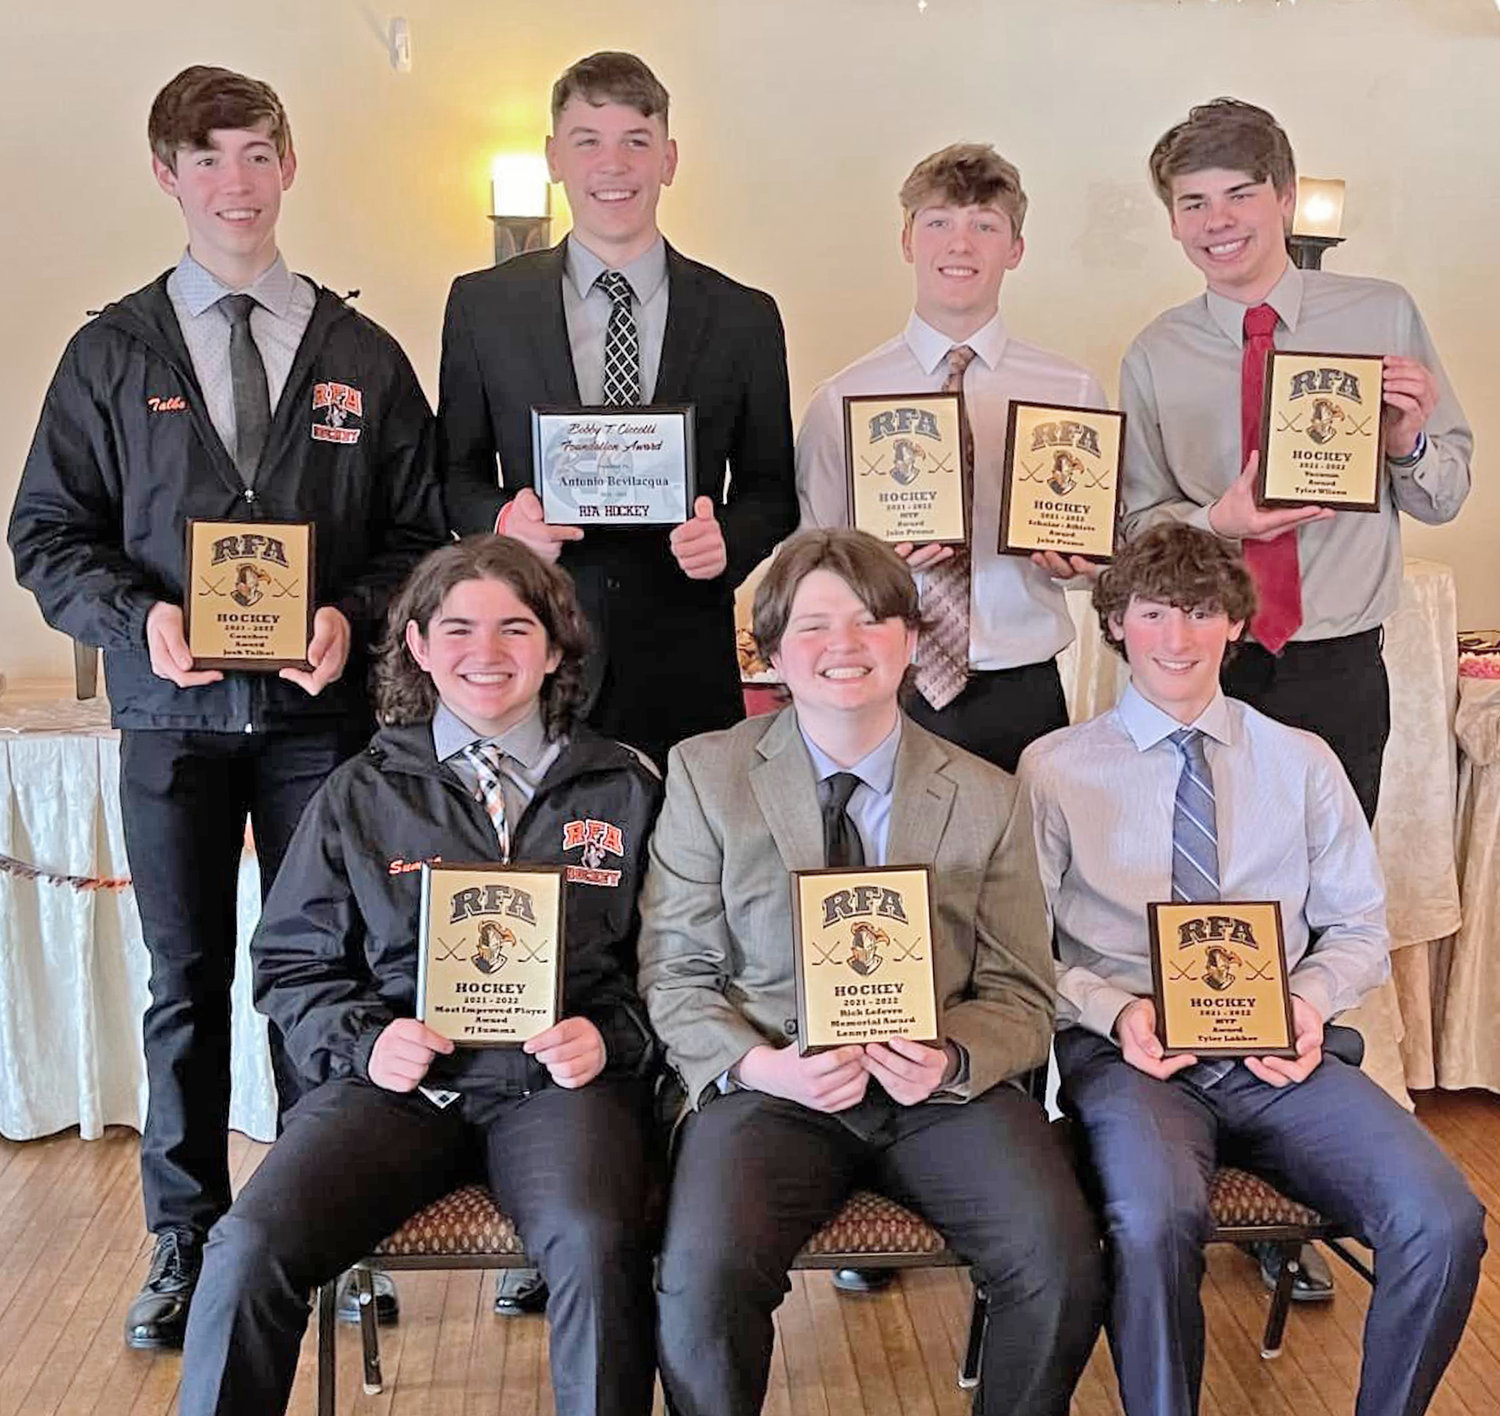 HOCKEY AWARDS — The Rome Free Academy varsity hockey team held its annual banquet on March 27 at the Delta Lake Inn. From left: Josh Talbot, Coaches Award; PJ Summa, Most Improved; Antonio Bevilacqua, Bobby T. Ciccotti Memorial Award; Lenny Dormio, Rick Lefevre Memorial Award; Jacob Premo, Scholar Athlete Award and Most Valuable Player; Tyler Lokker, Most Valuable Player; and Tyler Wilson, Vacuum Award. Premo, Lokker, Wilson and Bevilacqua were also named Section III Division I all-league team honorable mentions.